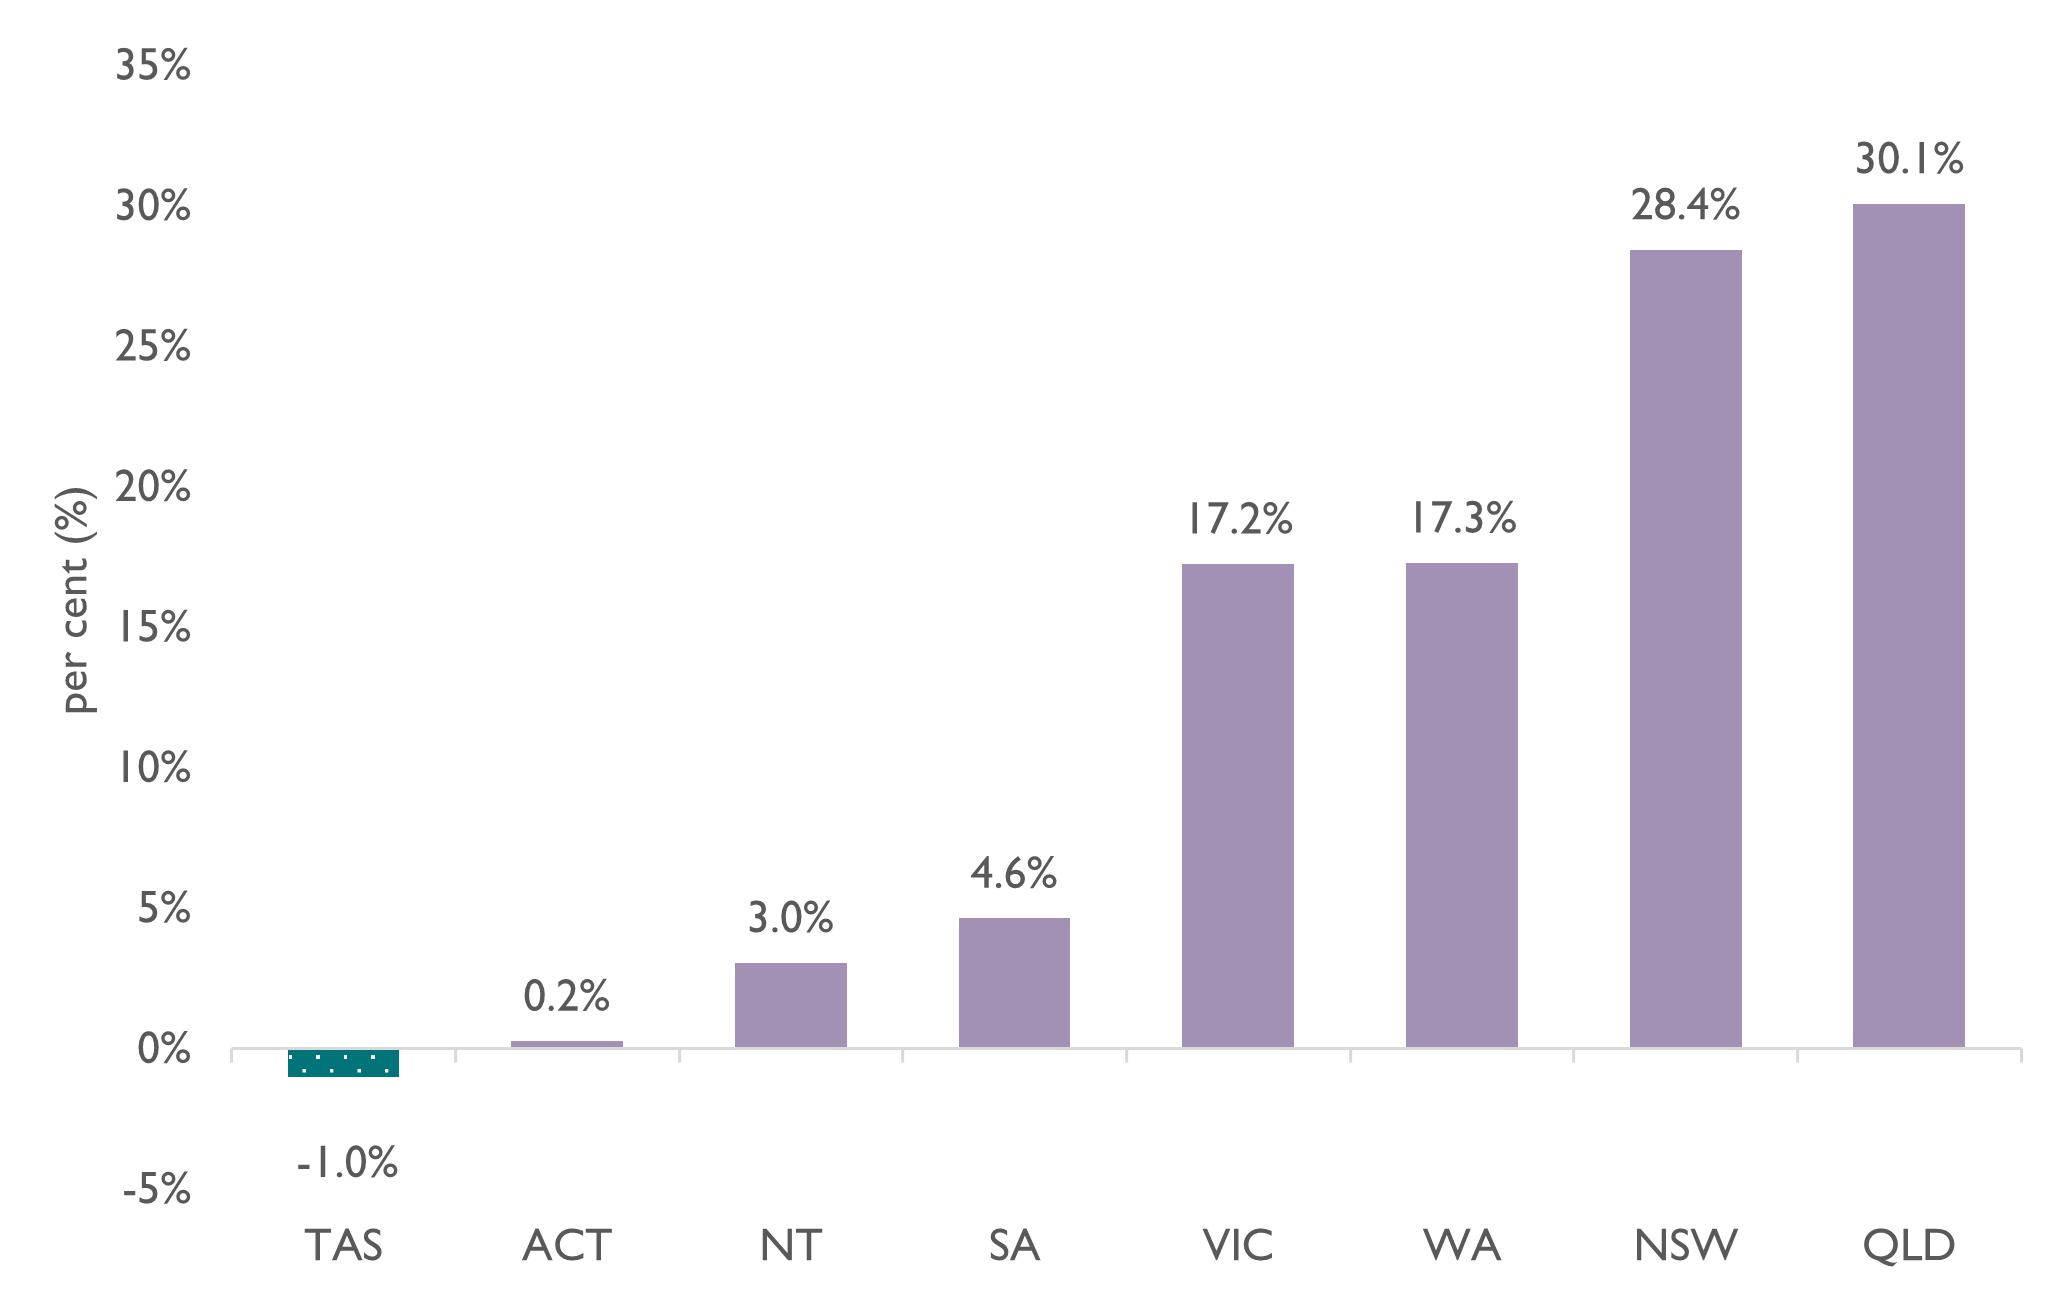 This figure is a bar chart showing that in 2021 Tasmania contributed to reducing Australia’s total emissions, contributing minus 1.0 per cent. Other state and territory contributions were: ACT (0.2 per cent), NT (3.0 per cent), SA (4.6 per cent), VIC (17.2 per cent), WA (17.3 per cent), NSW (28.4 per cent), and QLD (30.1 per cent).